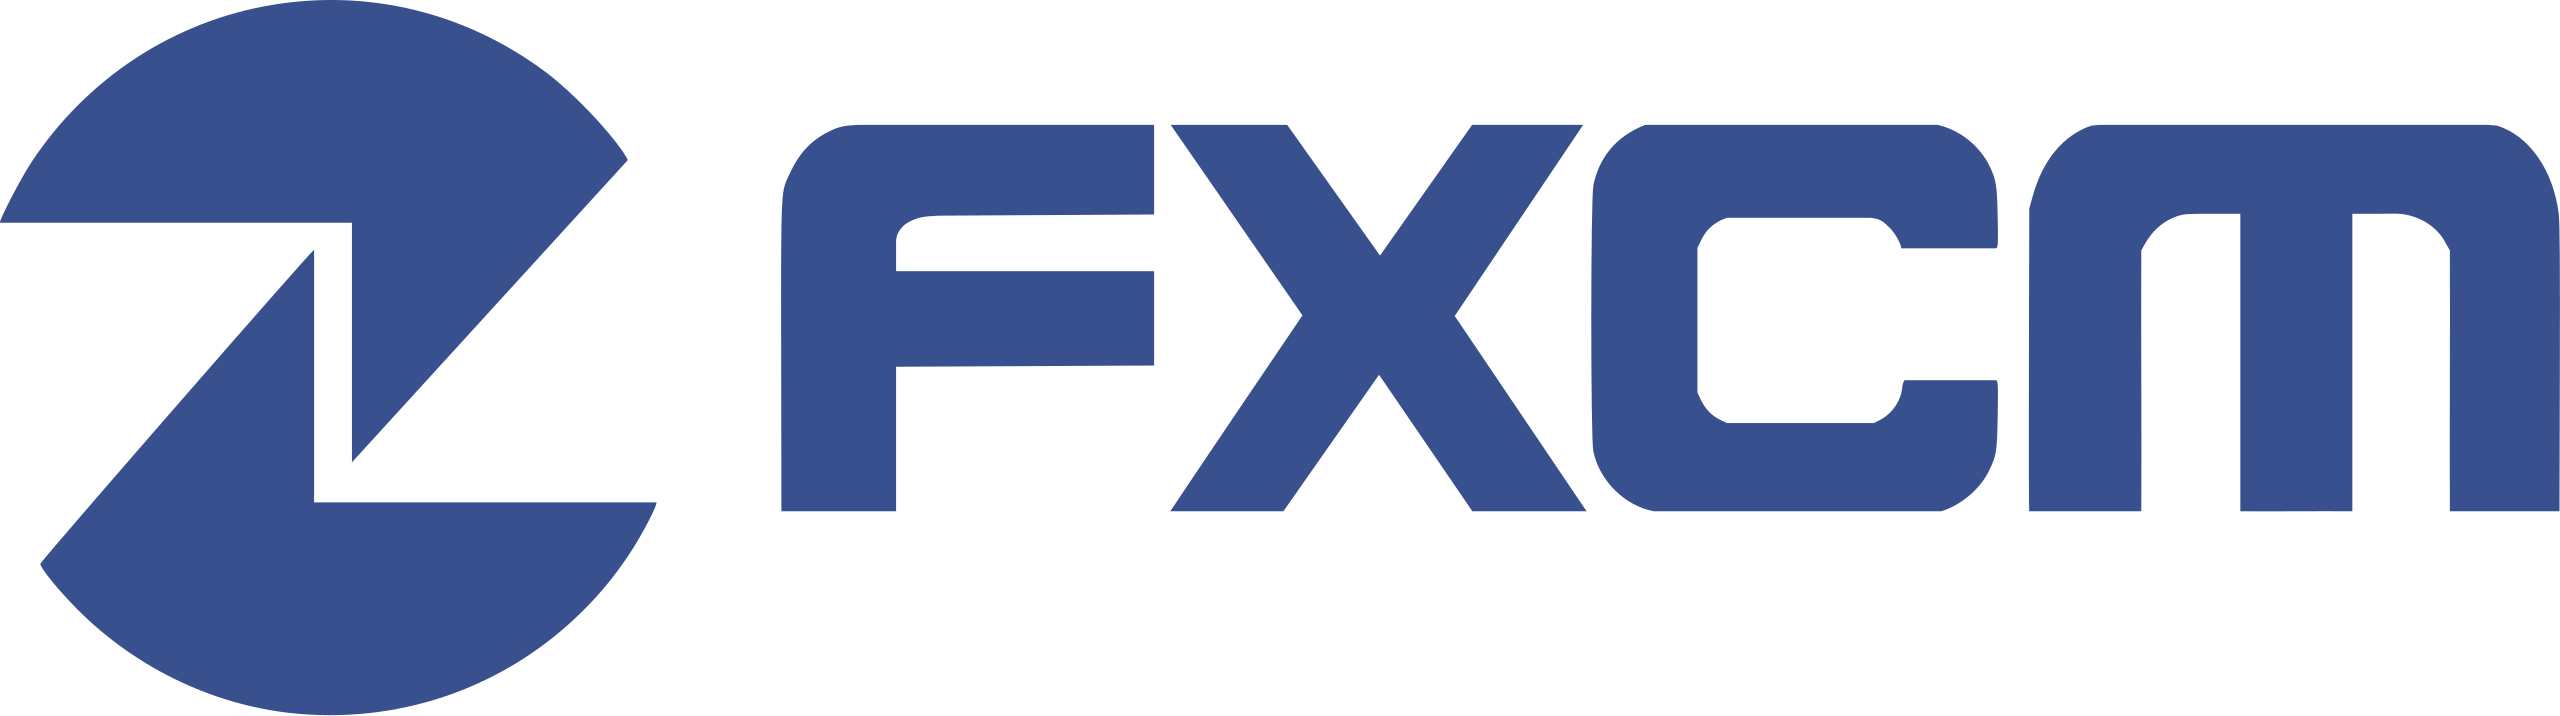 FXCM_CFD Broker in South Africa